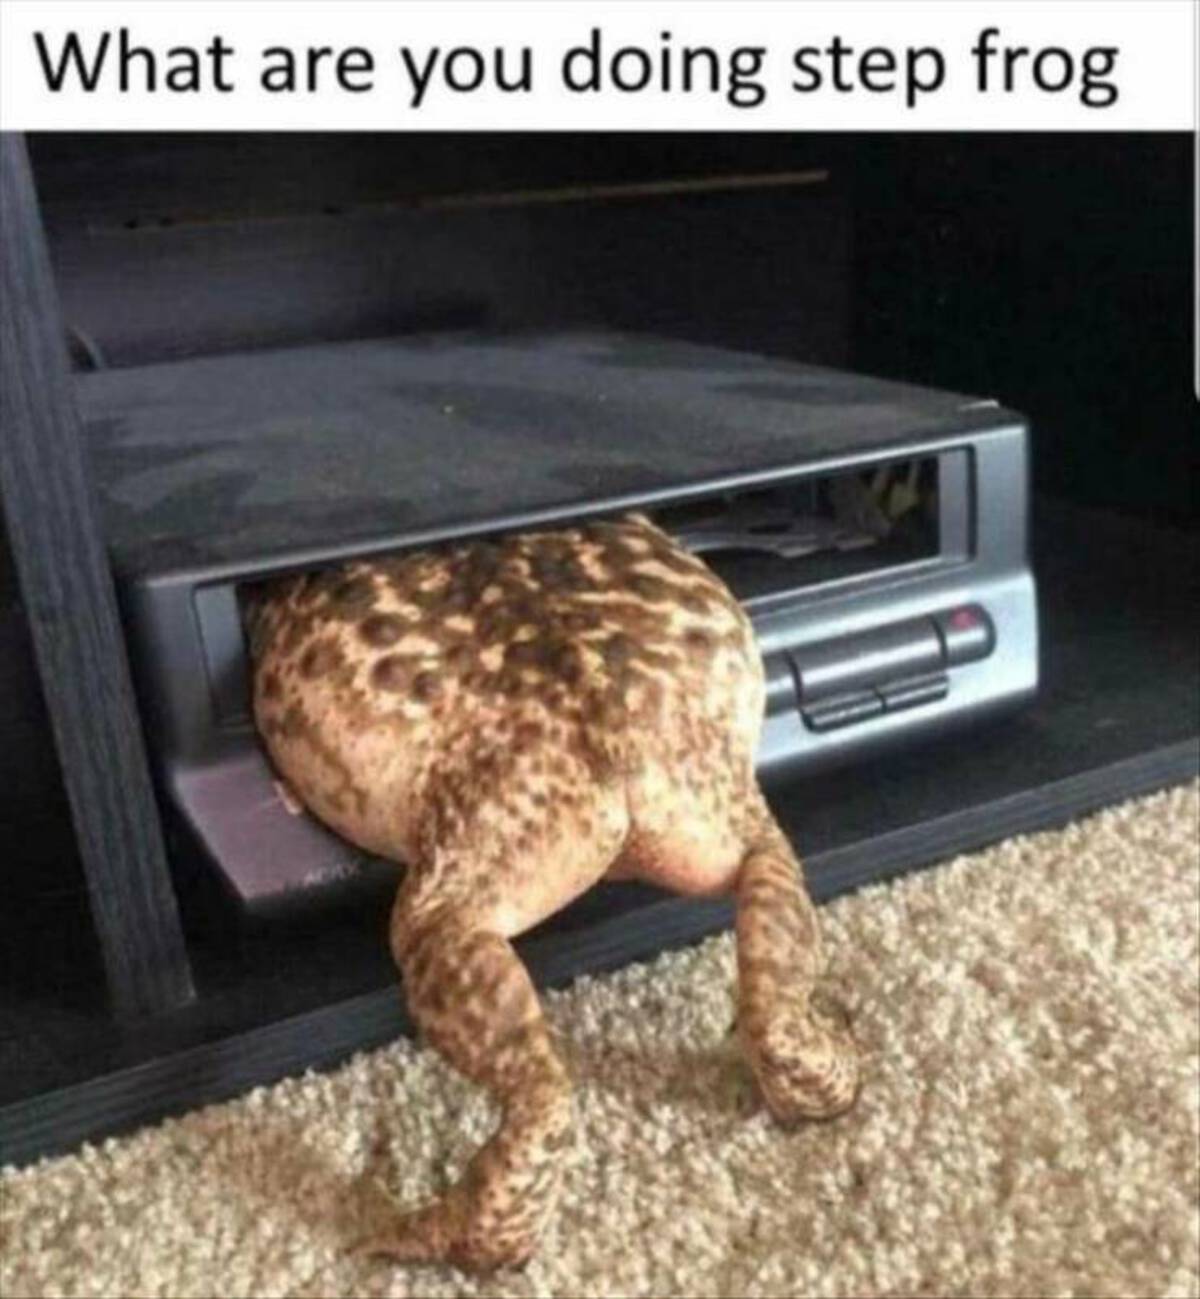 ım stuck - What are you doing step frog